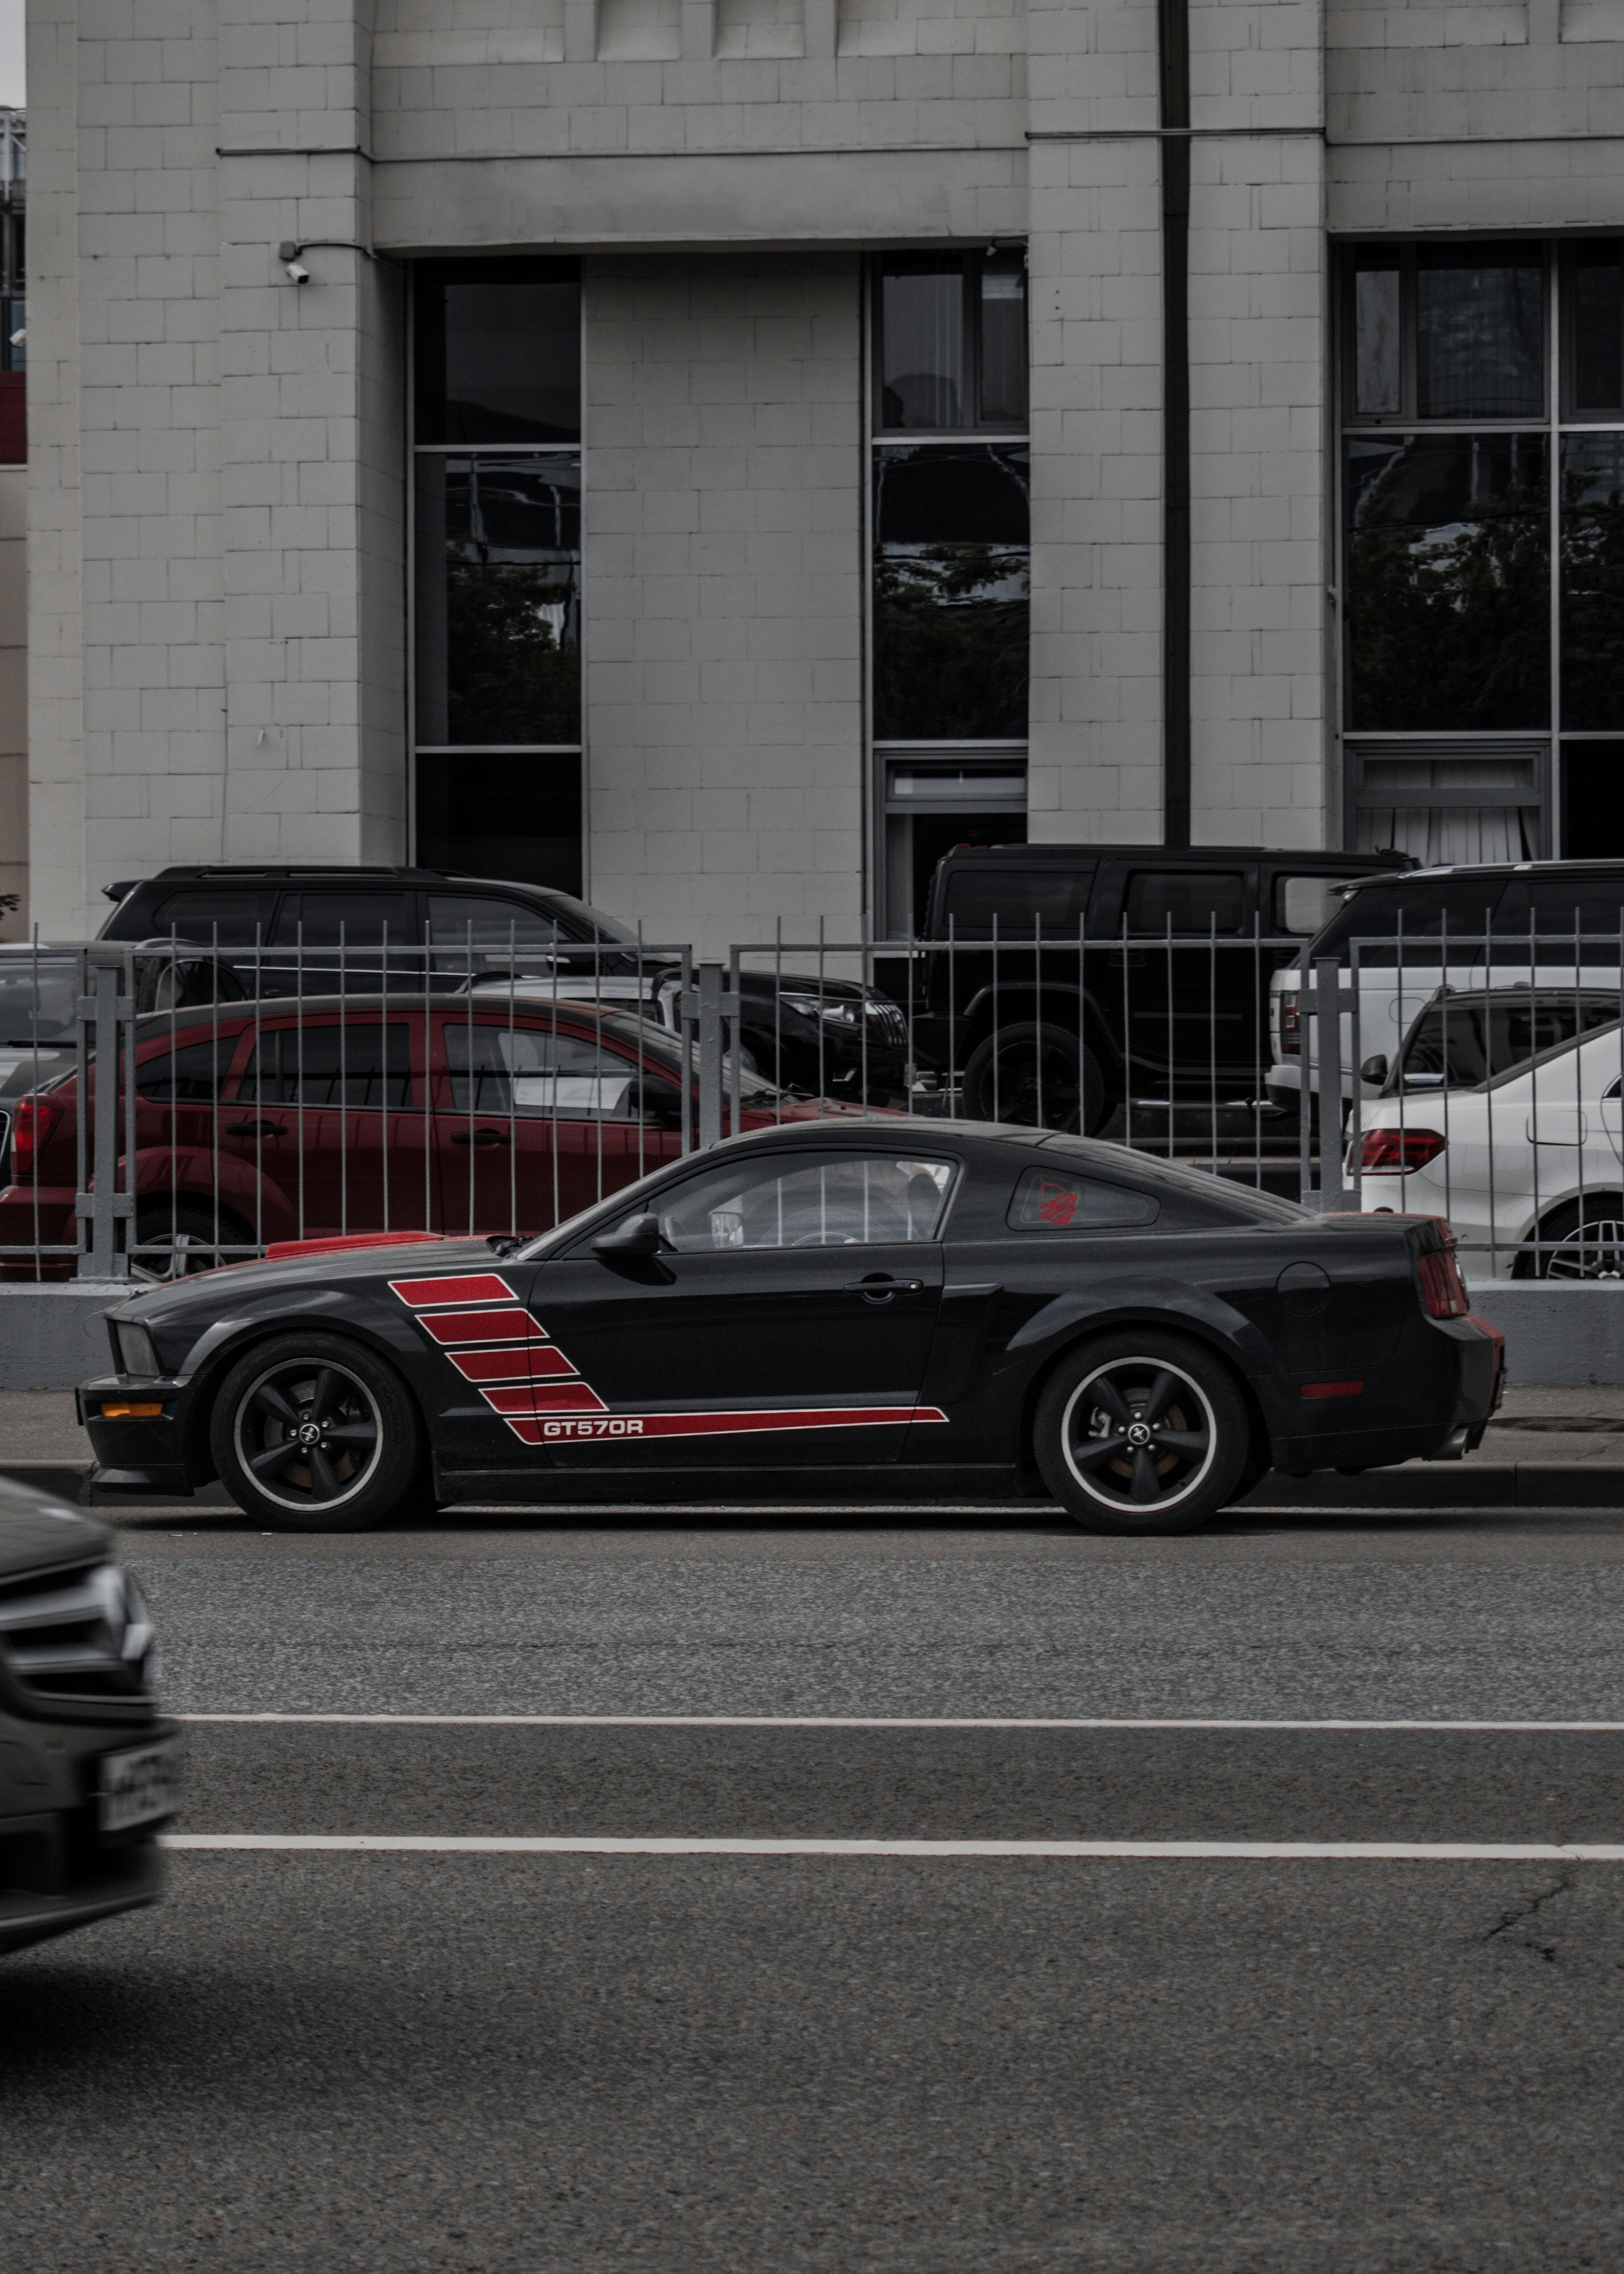 black and red car parked beside building